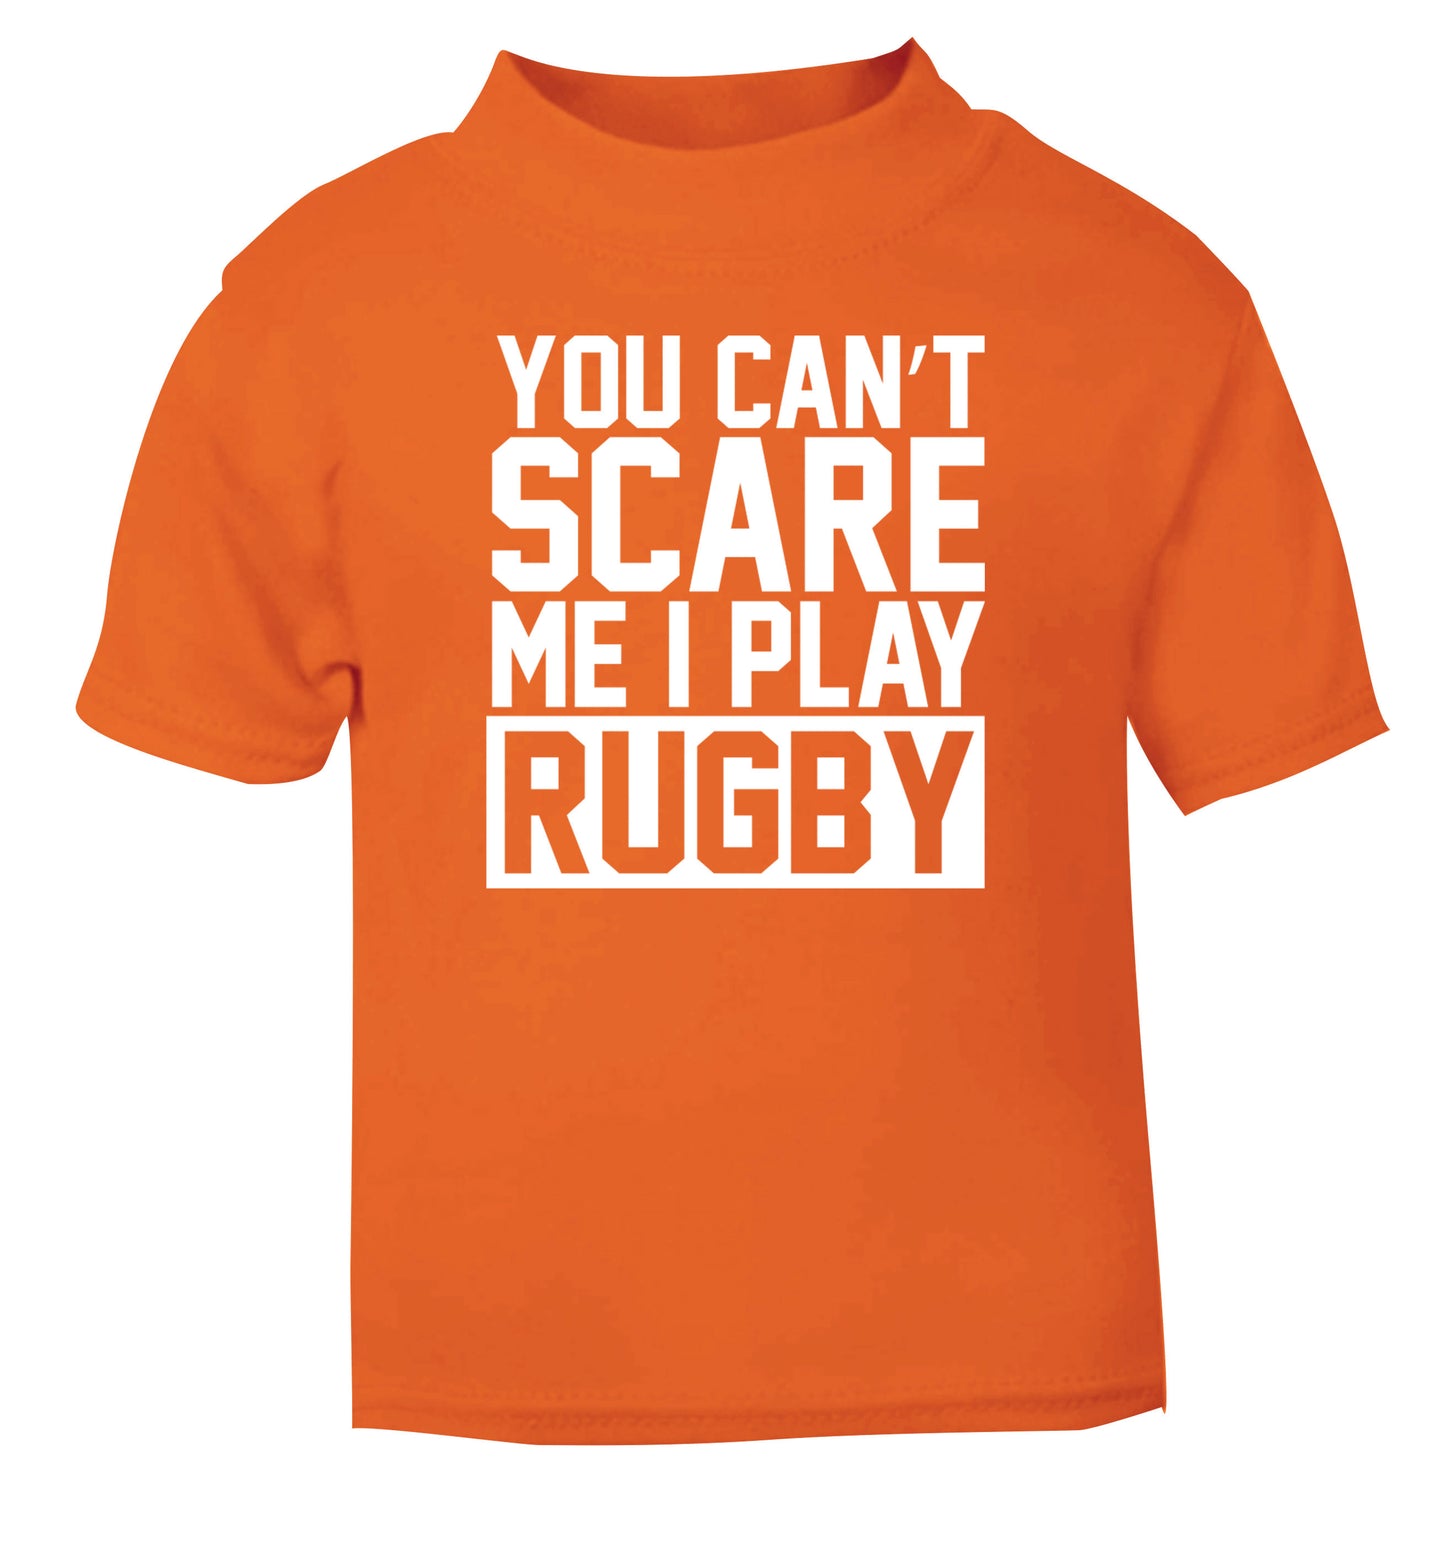 You can't scare me I play rugby orange Baby Toddler Tshirt 2 Years